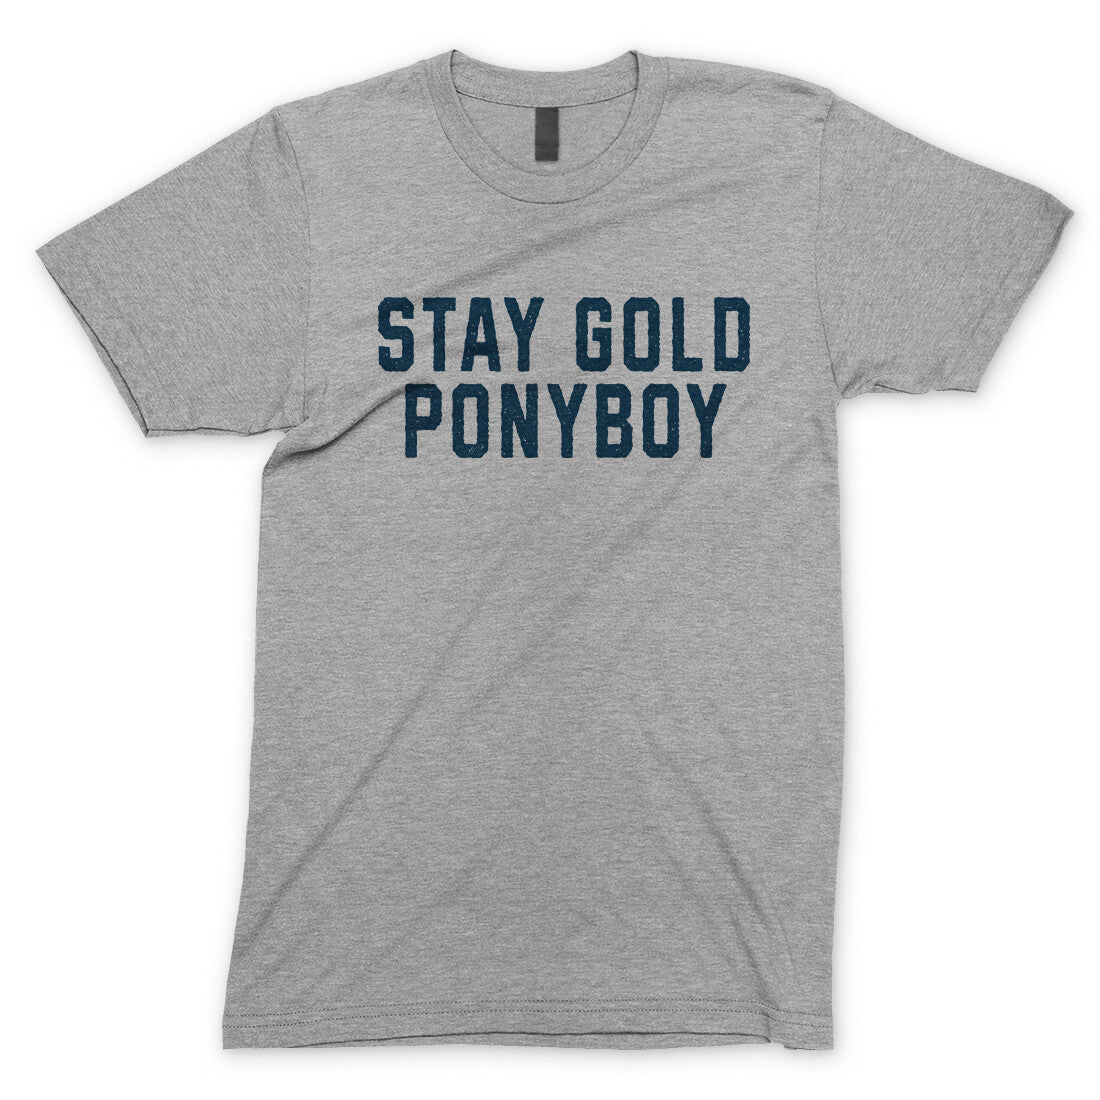 Stay Gold Ponyboy in Sport Grey Color